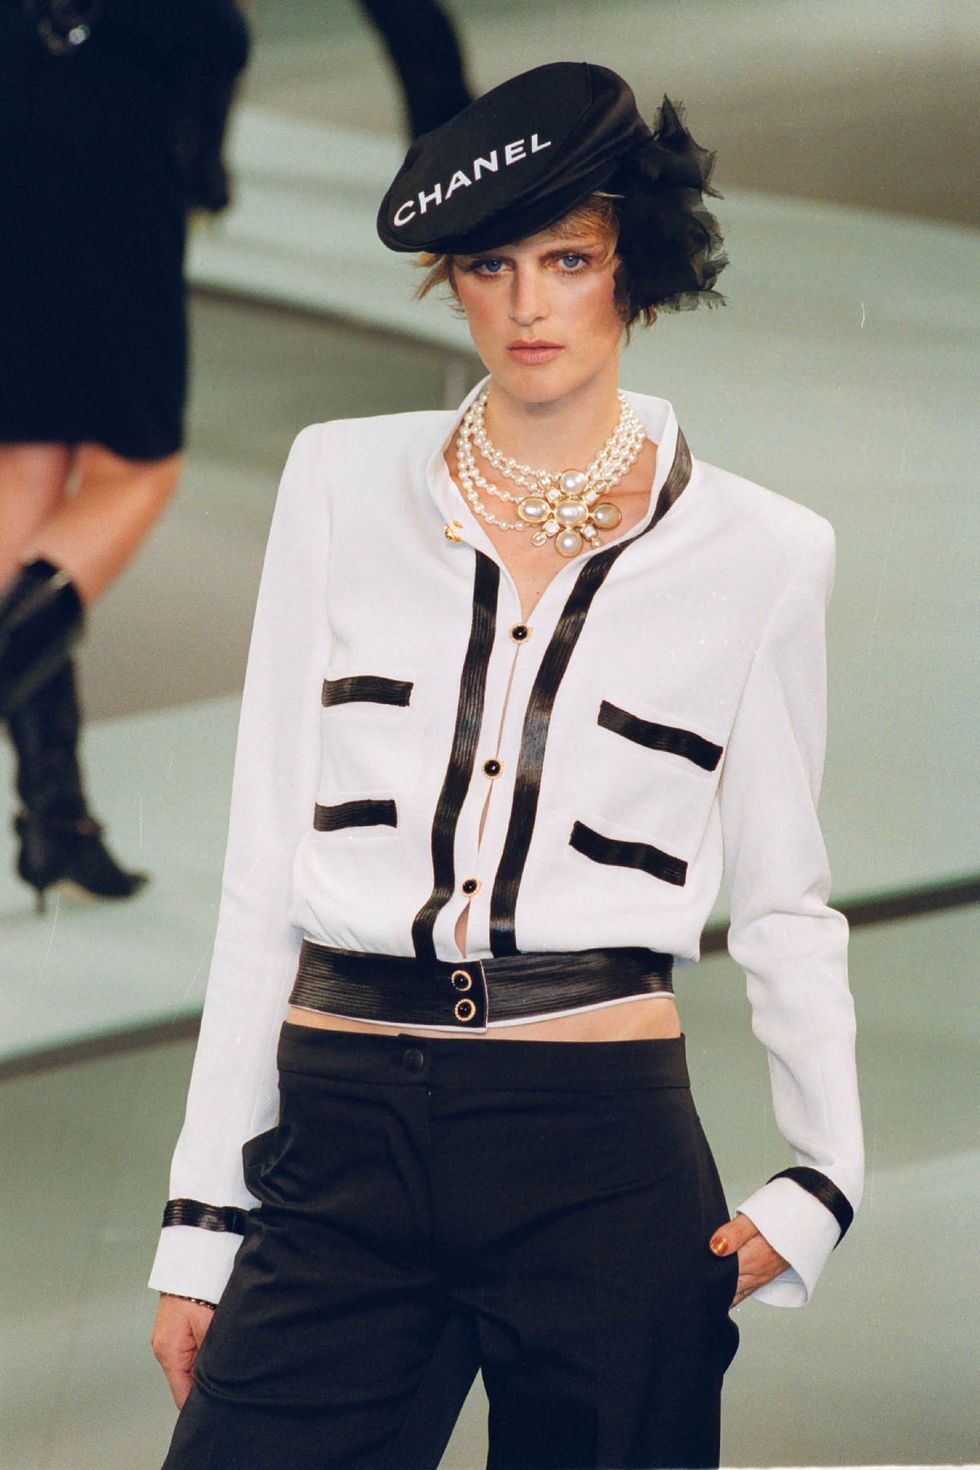 Chanel's Fashion Shows Over the Years - 1978 - 2015 Chanel Runway